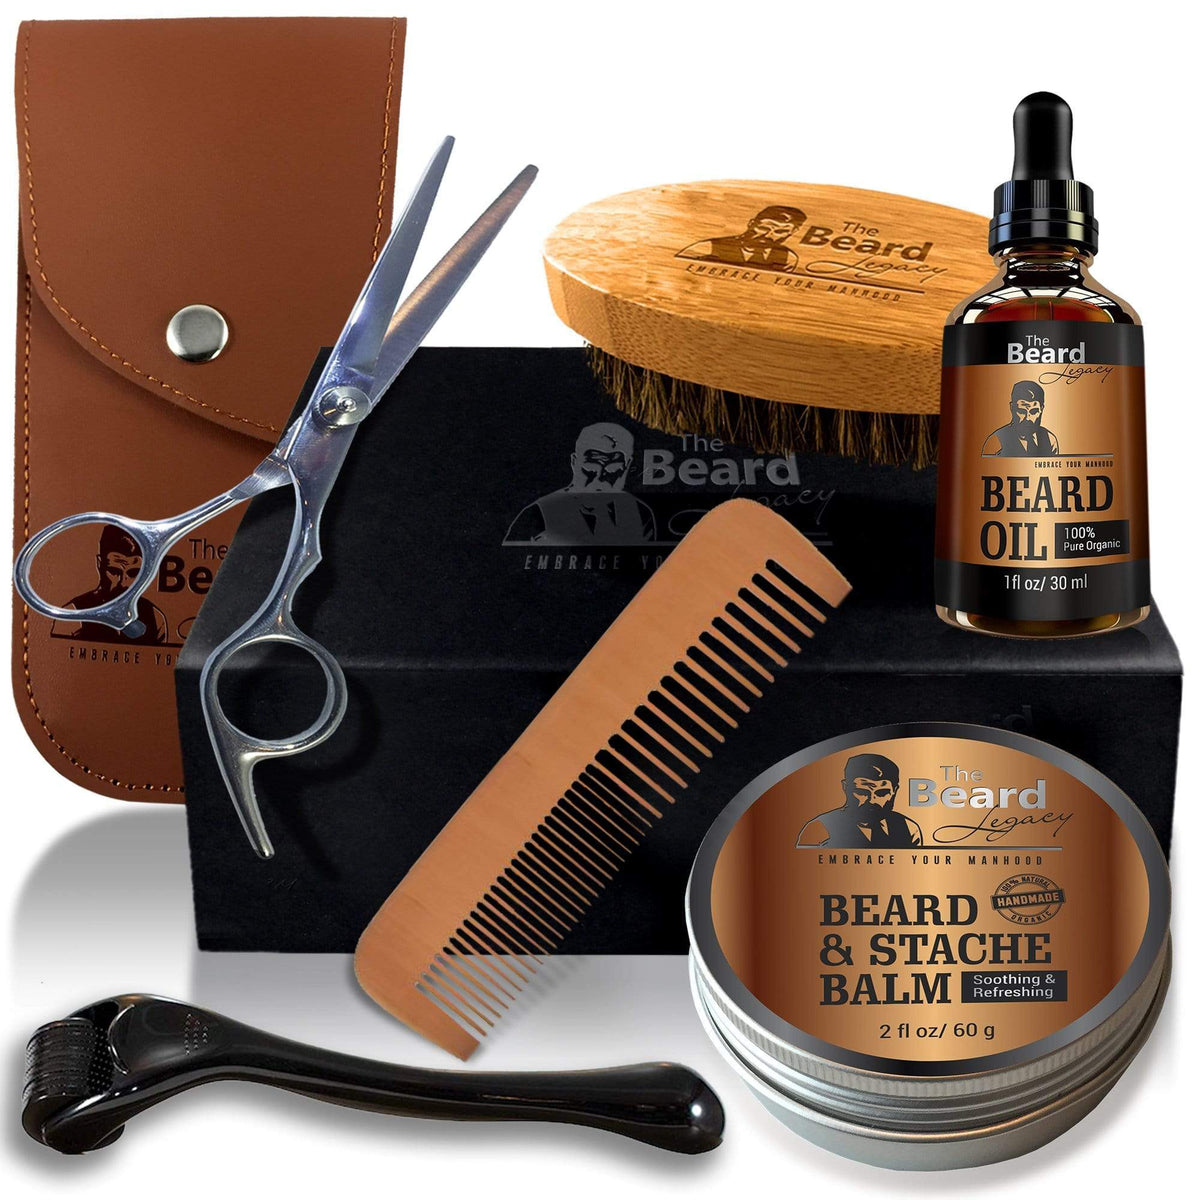 The Beard Legacy A Complete Beard Grooming Kit For Men 1917